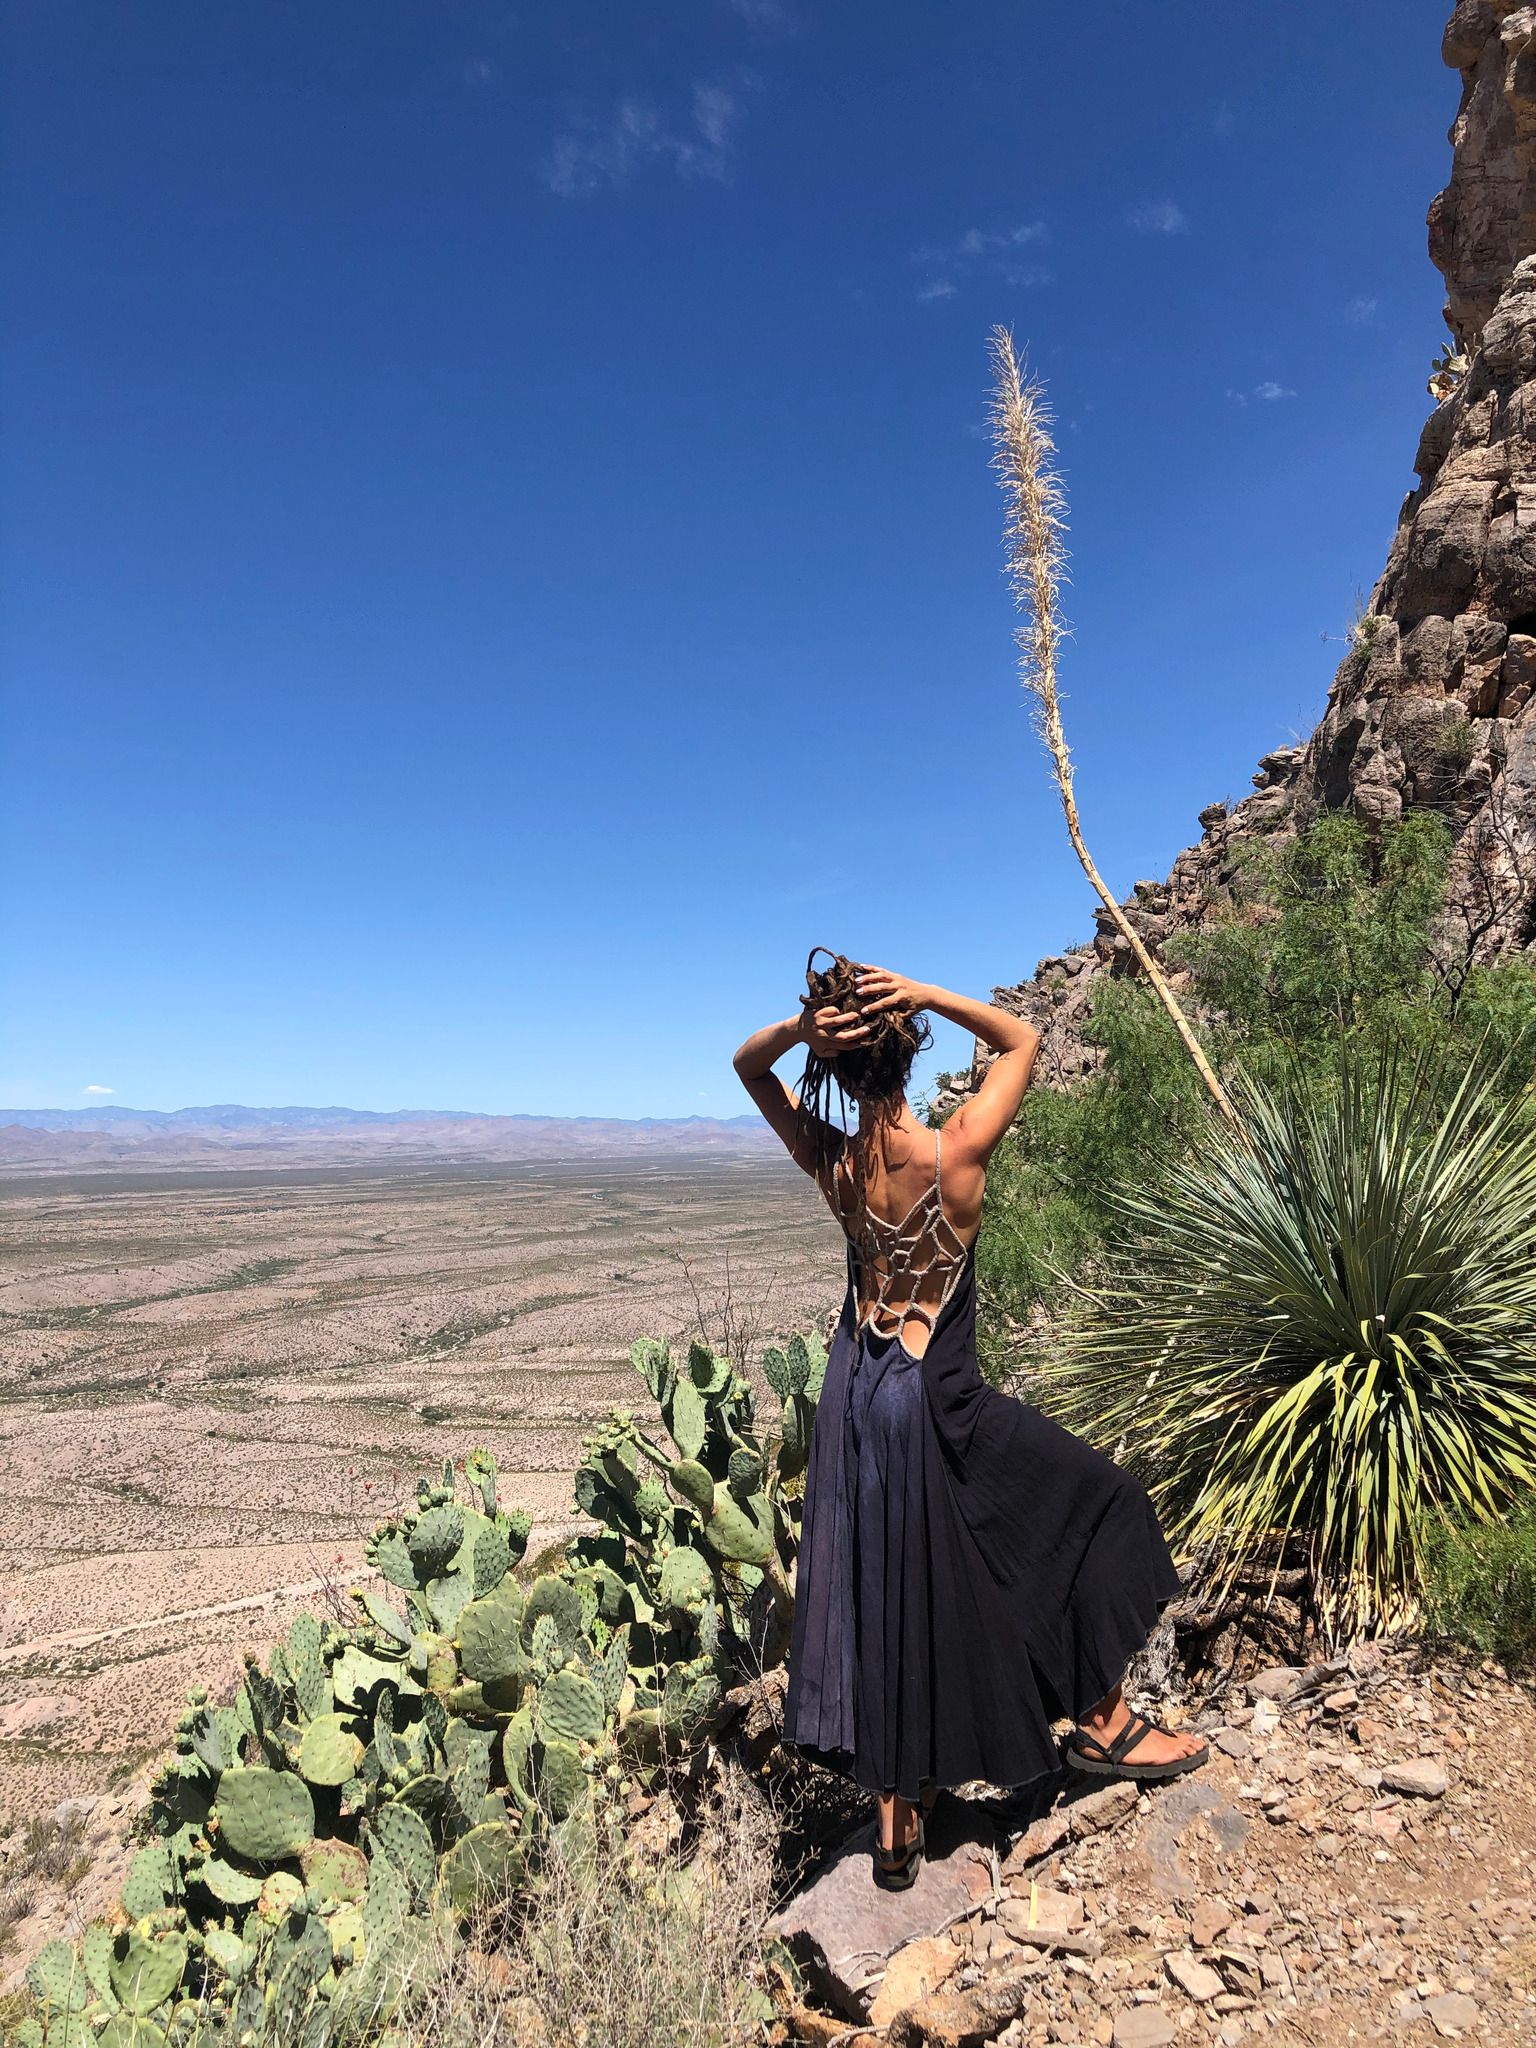 Woman wearing blue and grey dress in the desert